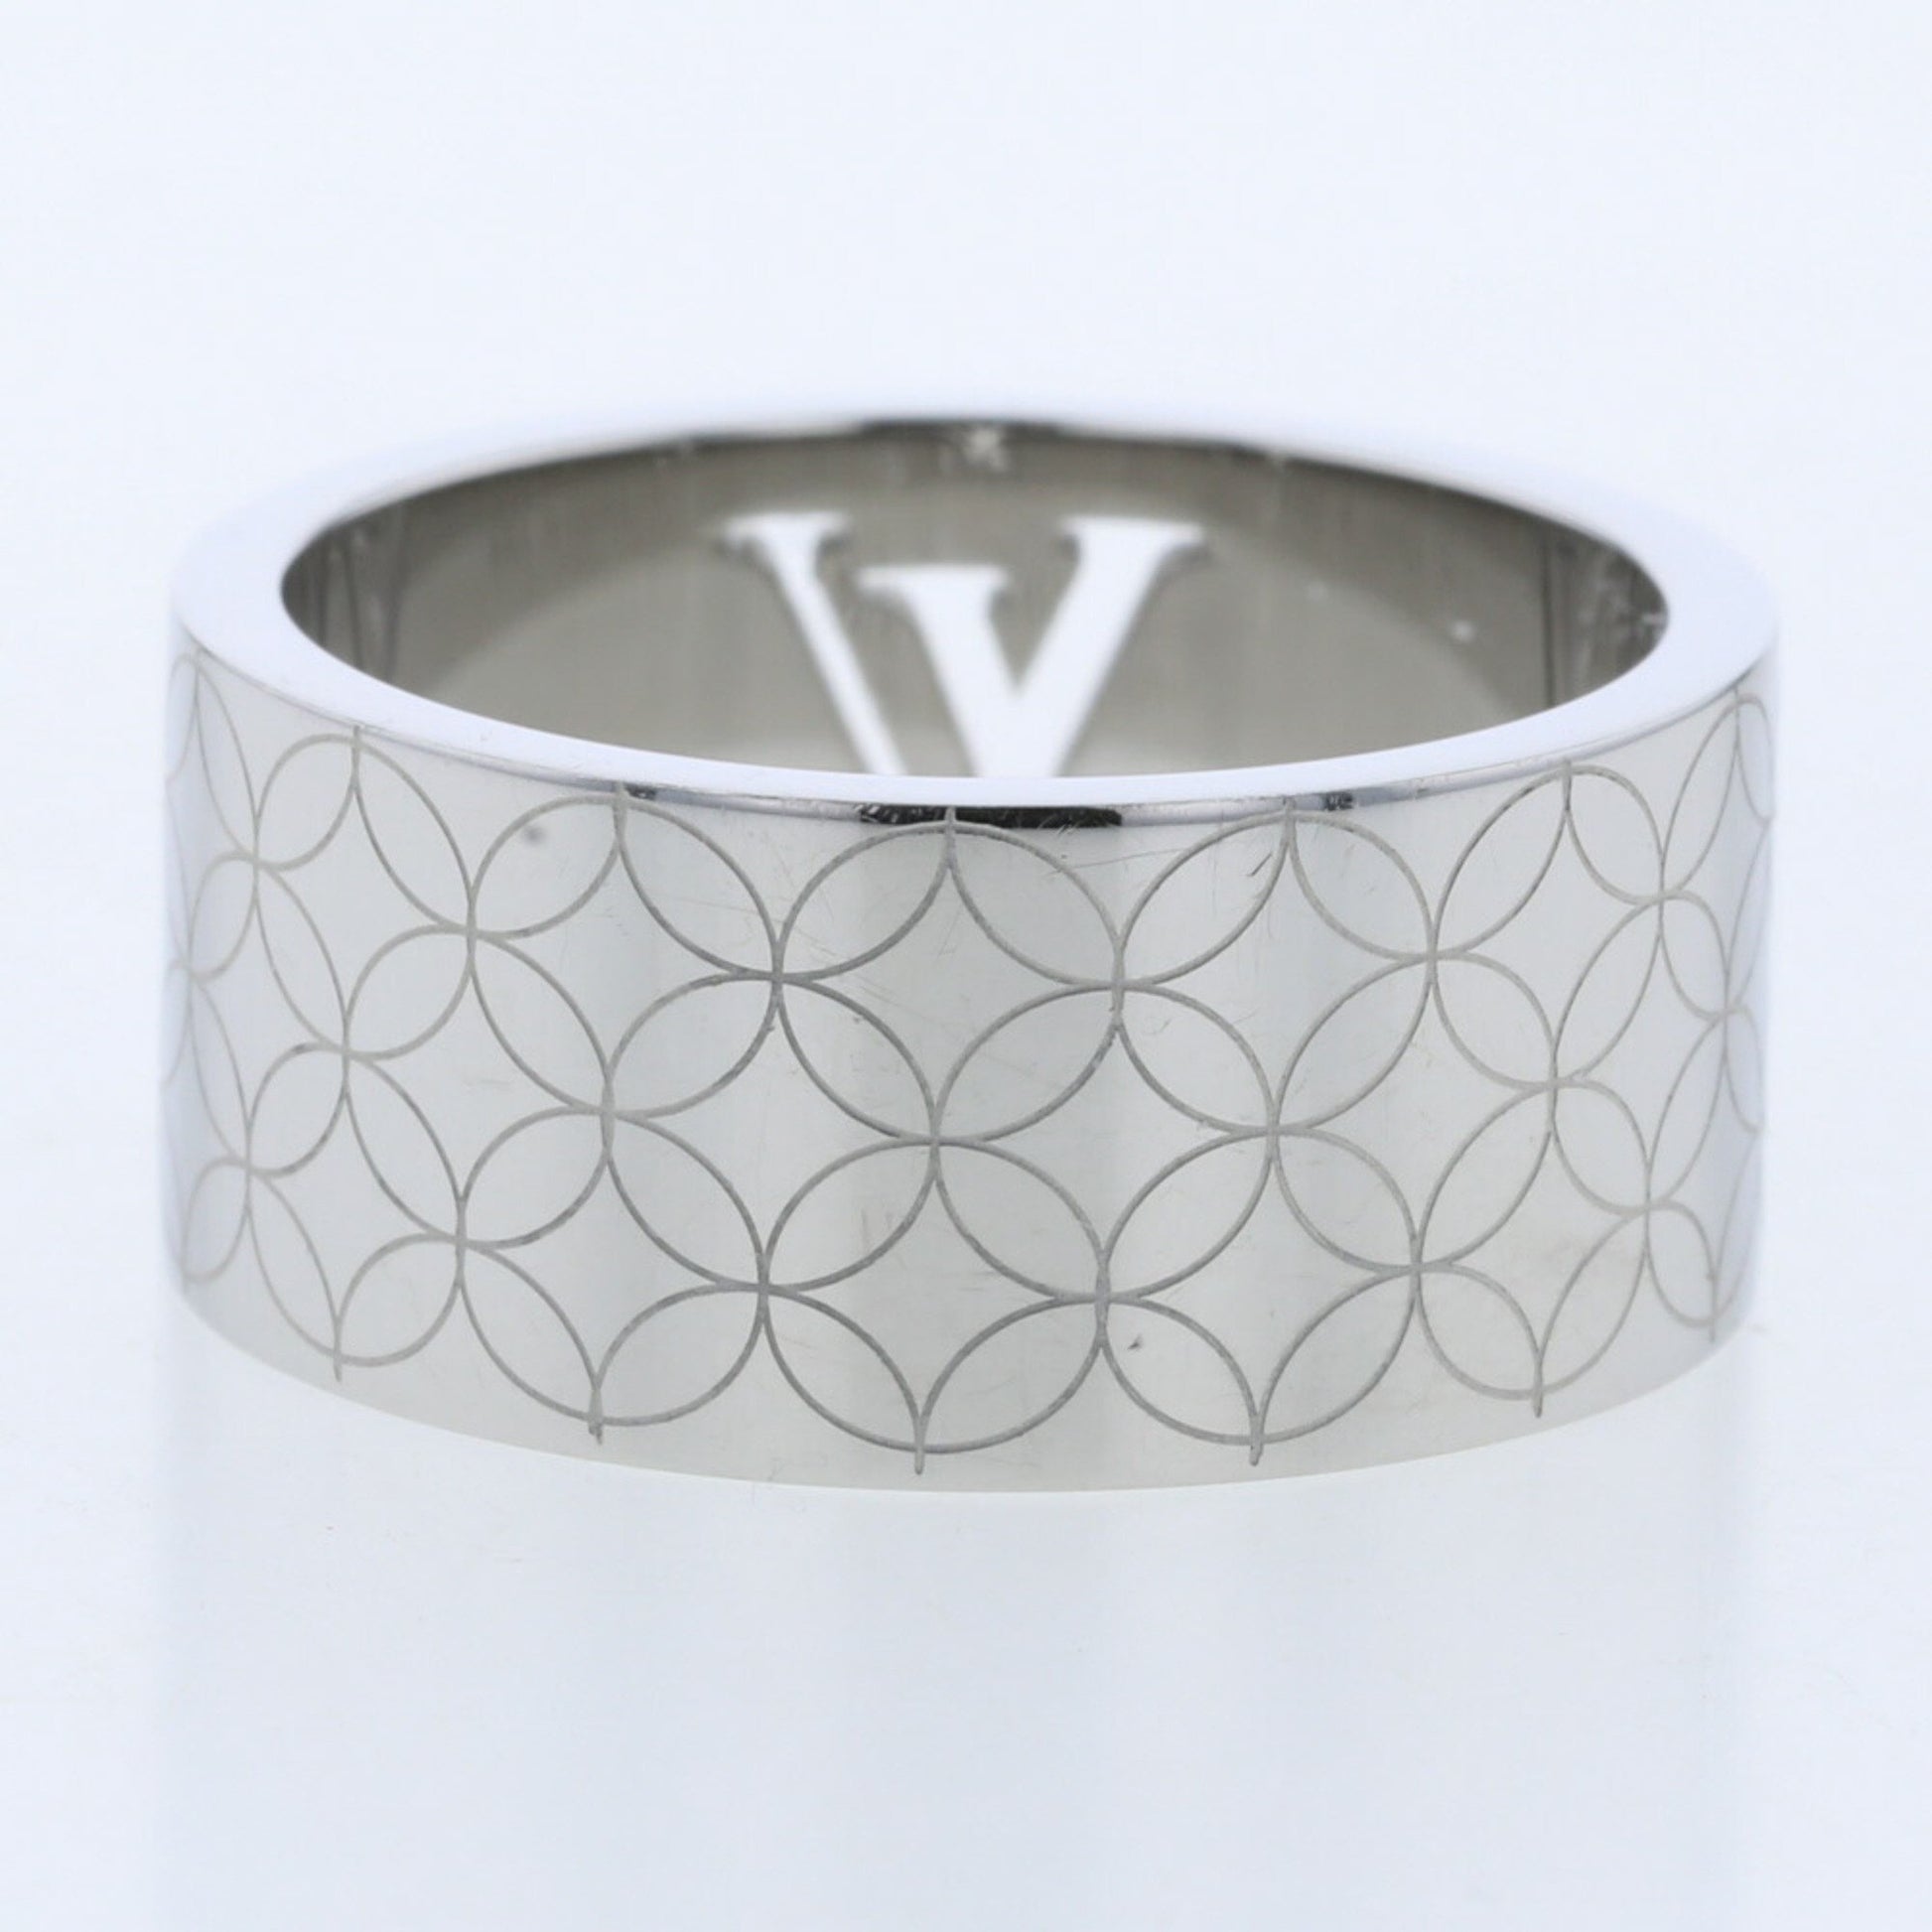 Louis Vuitton Ring Berg Champs Elysees M65456 Silver Plated Upper No. 16.5 Lower 18 Men's